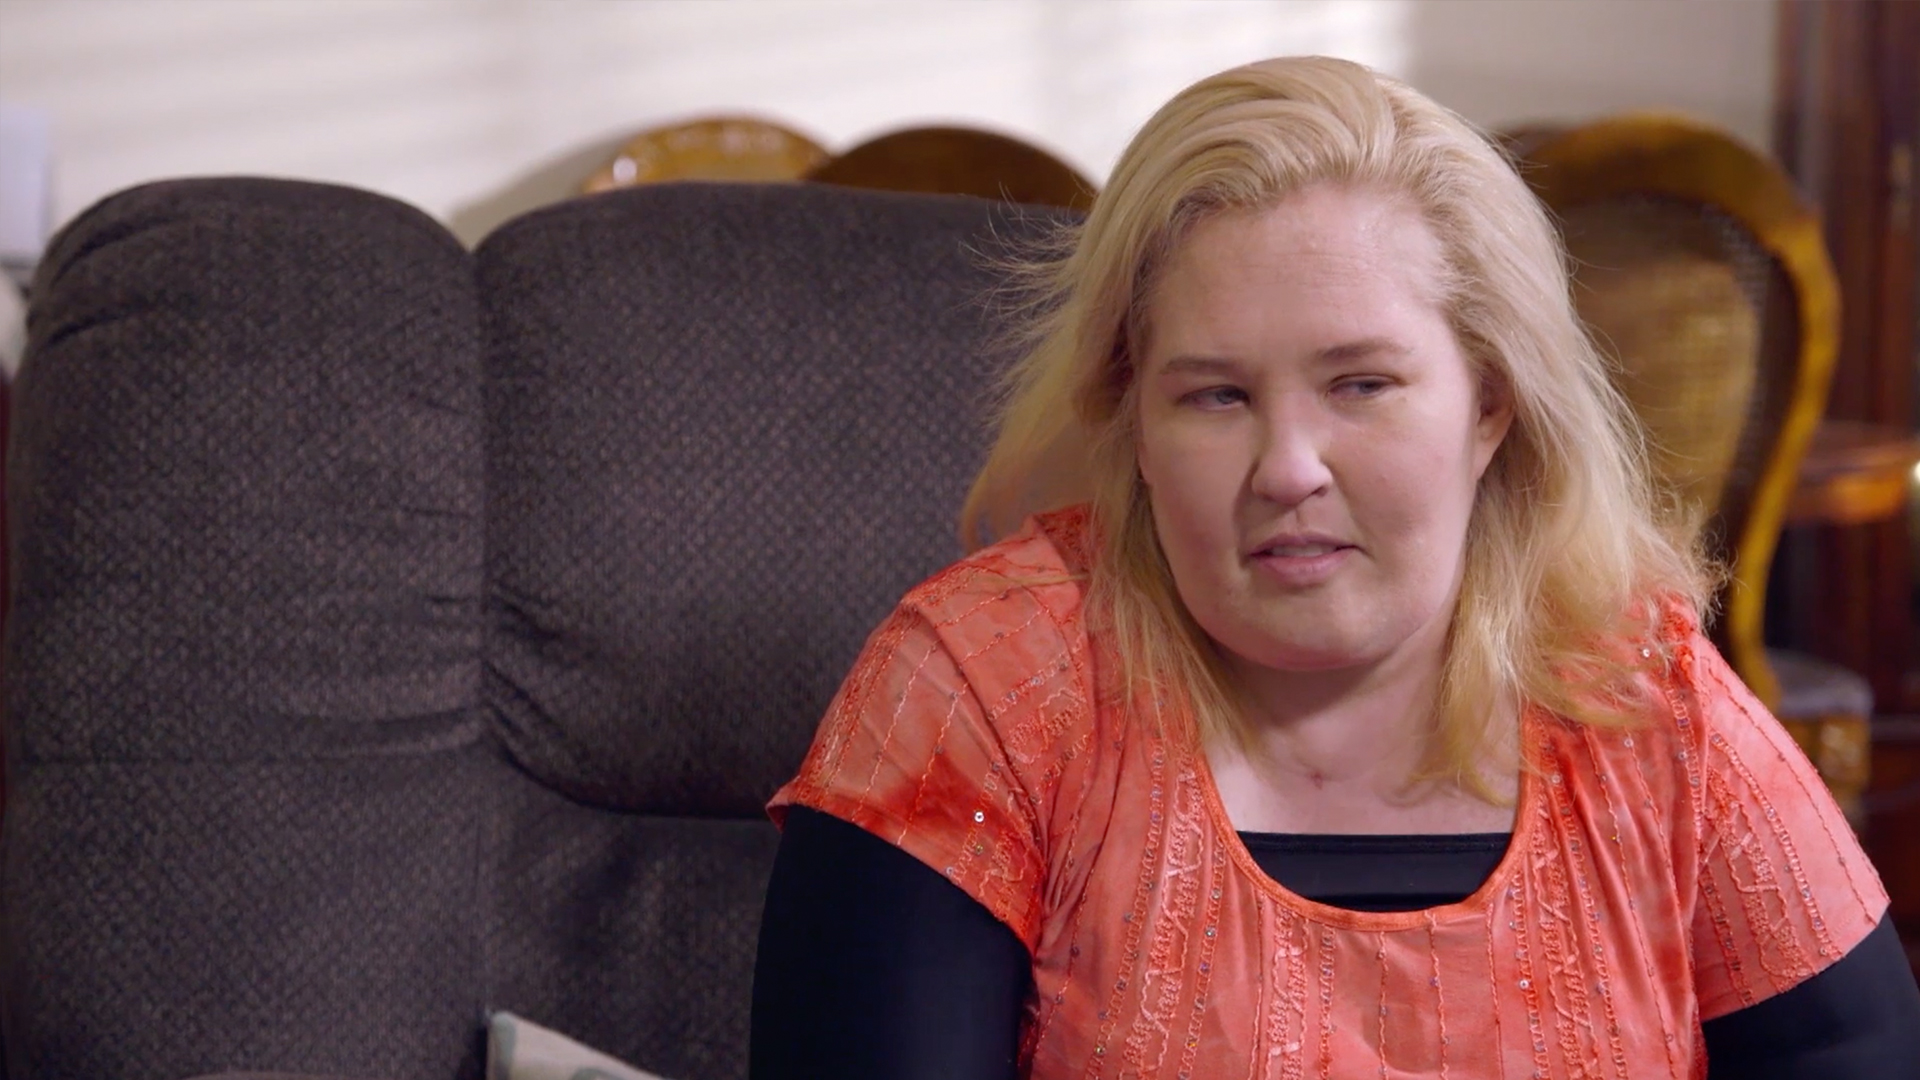 Watch June Gets Serious About Seeing Her Kids | Mama June: From Not to Hot Video Extras